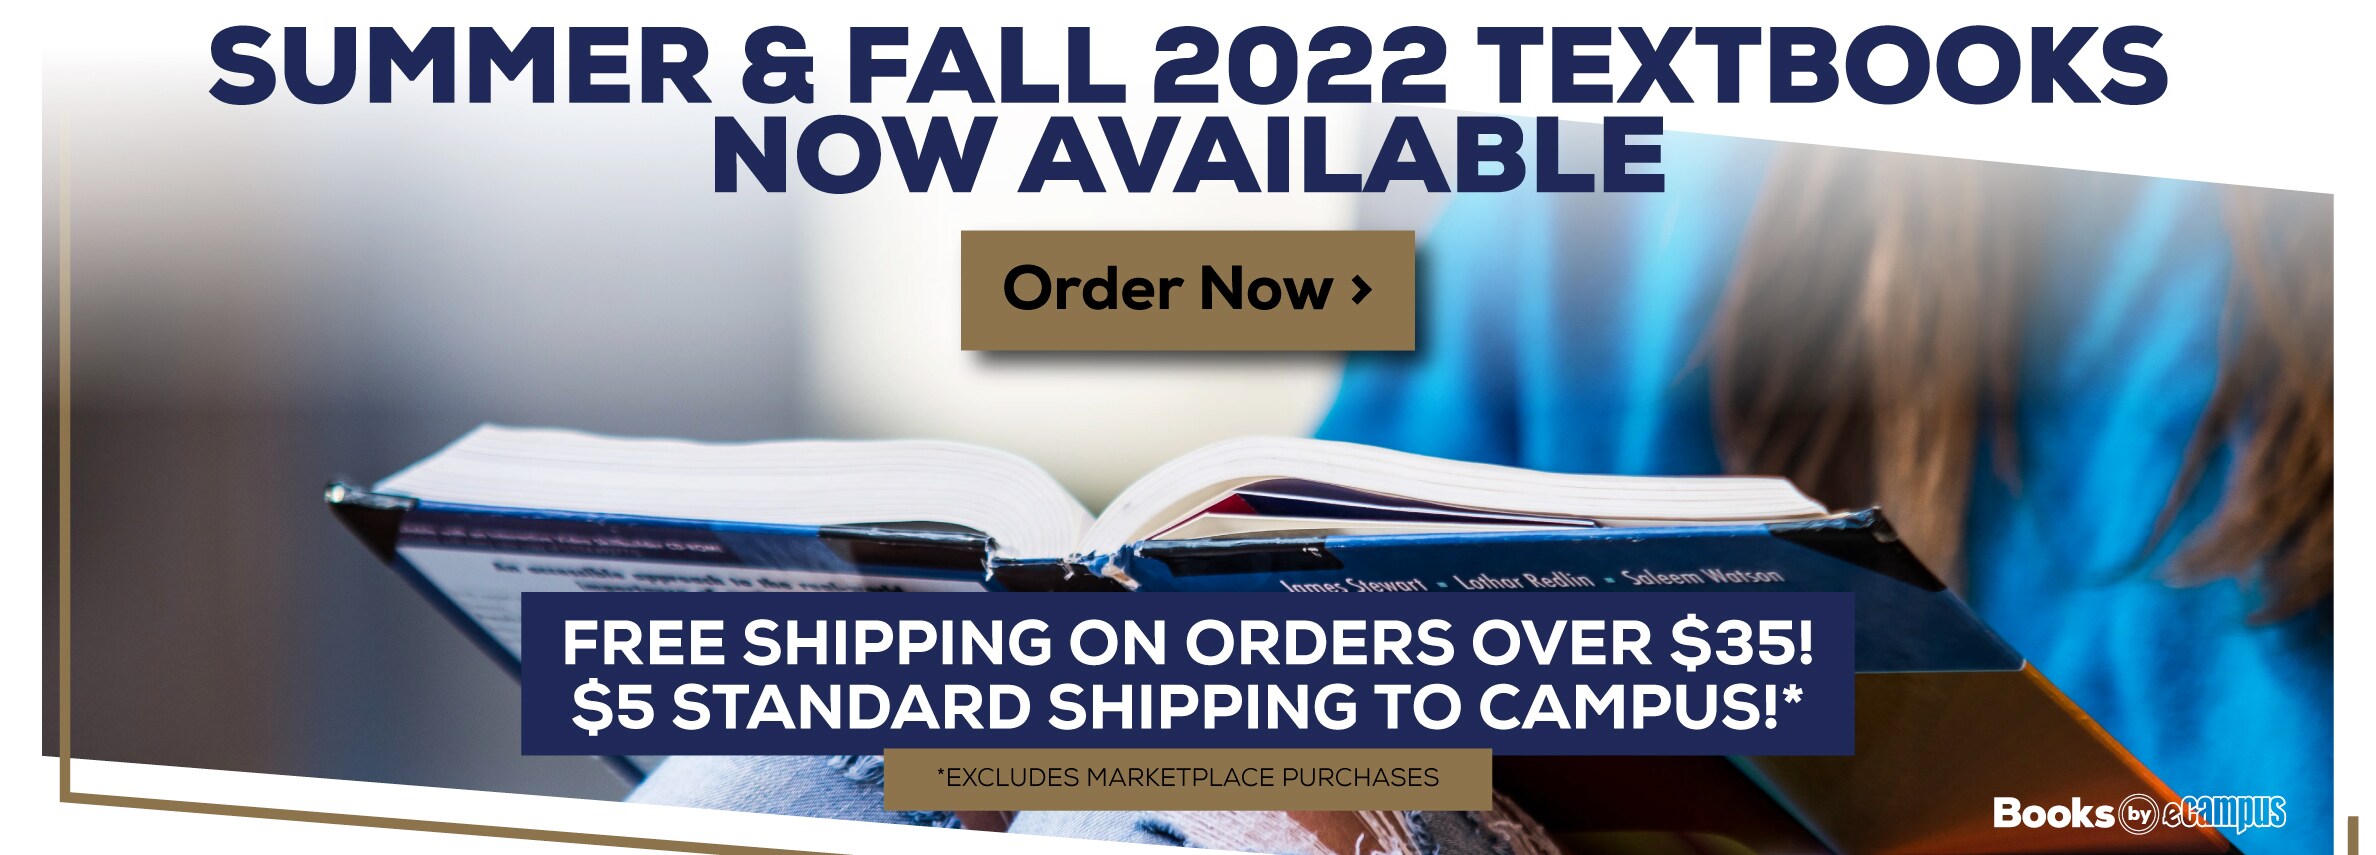 Summer & Fall Textbooks Now Available. Free shipping on orders over $35! $5 standard shipping to campus